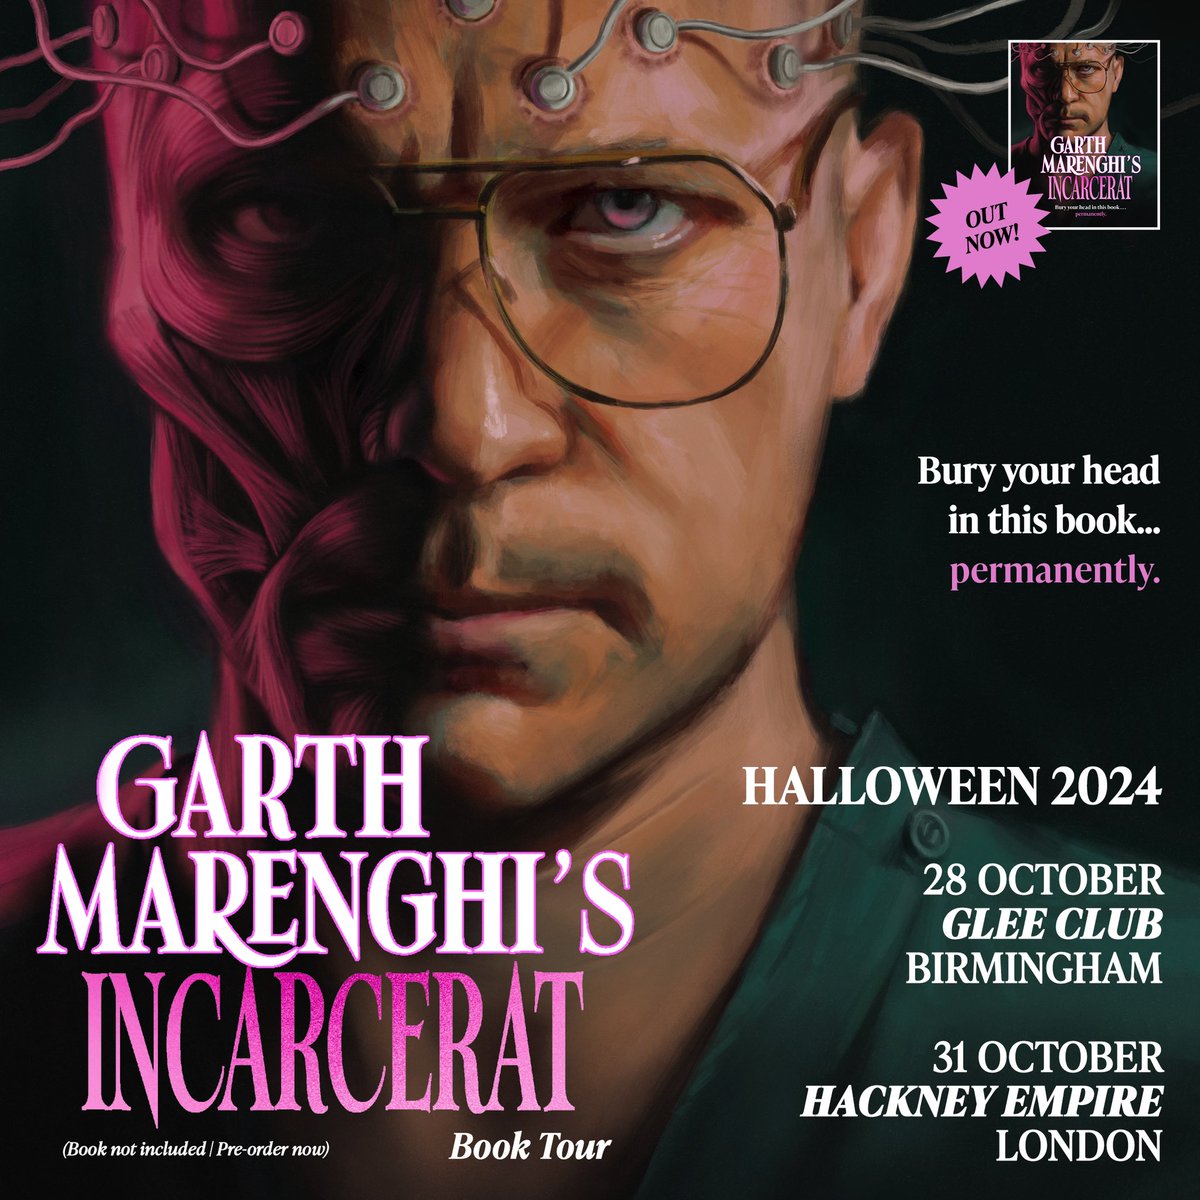 Garth Marenghi is taking his INCARCERAT BOOK TOUR to @GleeClubBham & London's @HackneyEmpire in October. Tickets on sale NOW Snap up tickets 👉 livenation.uk/ysNs50RiQm4